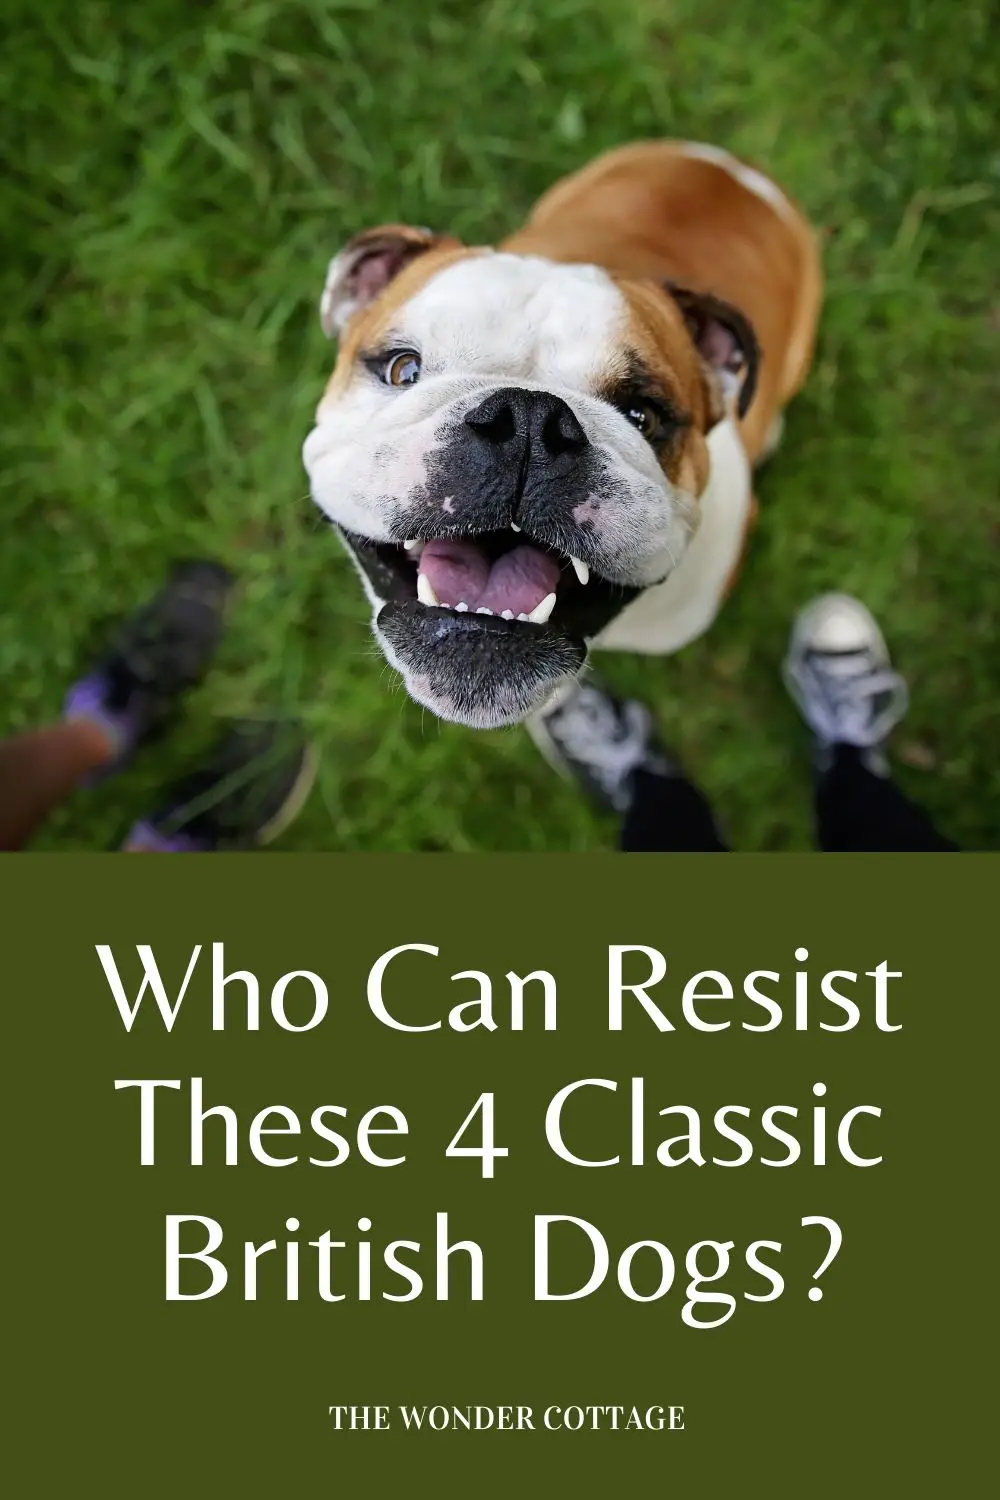 who can resist these 4 classic British dogs